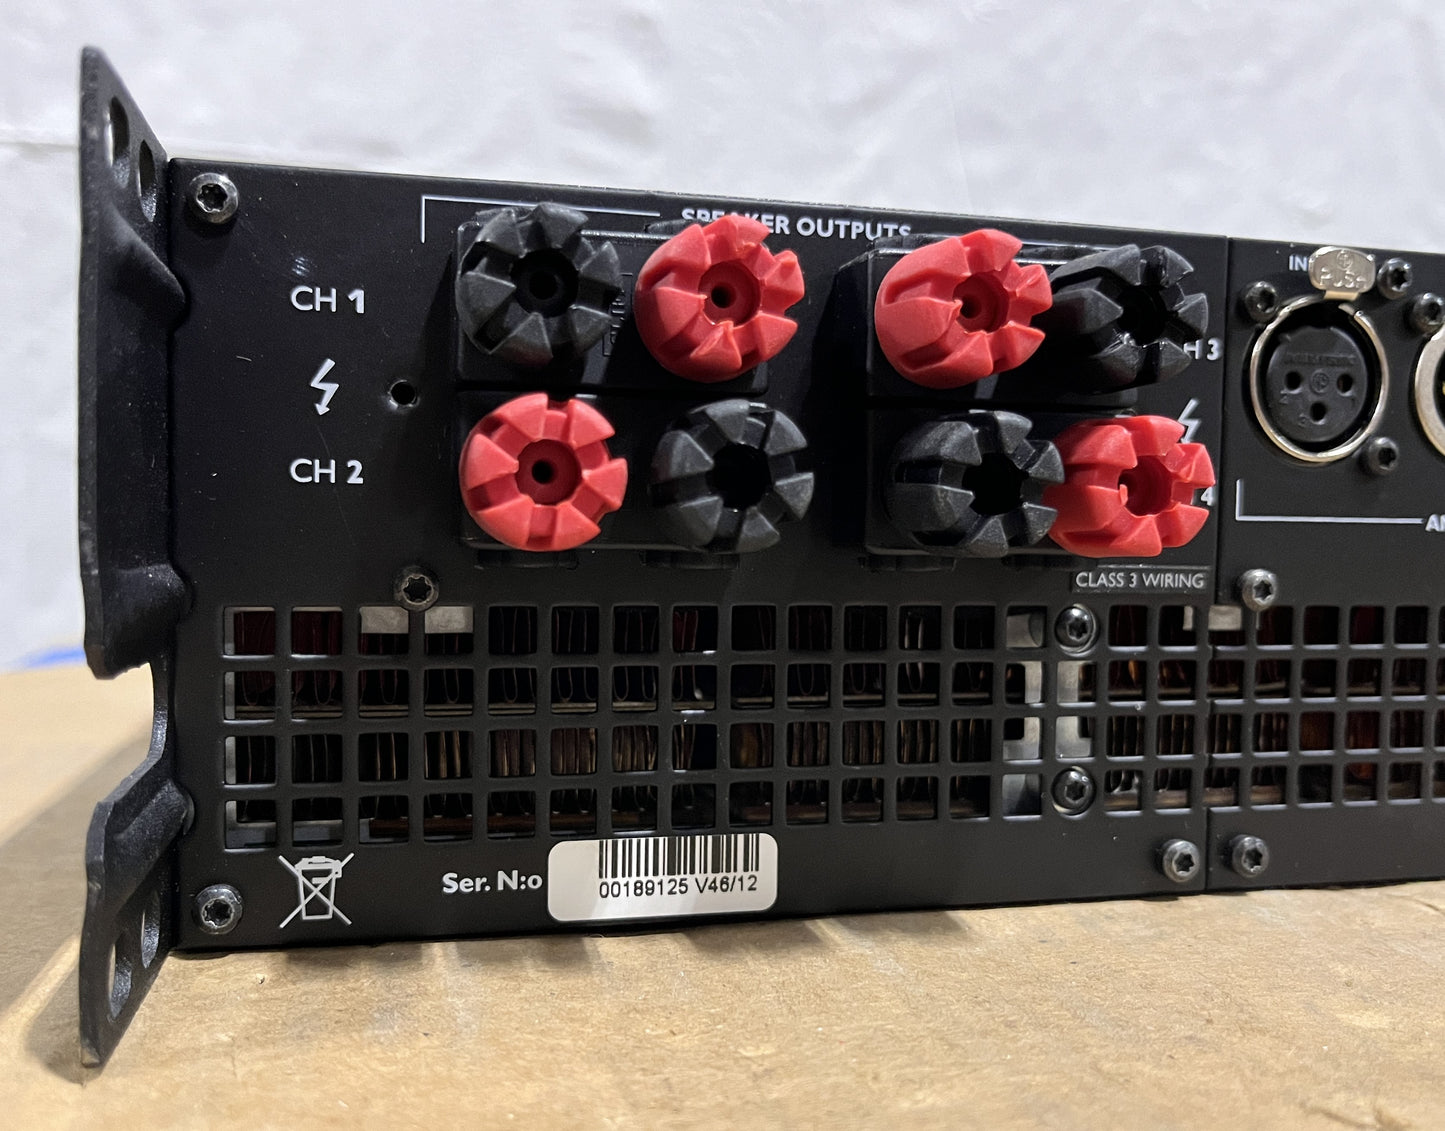 Used Lab Gruppen PLM 10000Q Power Amplifier for Sale. We Sell Professional Audio Equipment. Audio Systems, Amplifiers, Consoles, Mixers, Electronics, Entertainment, Sound, Live.